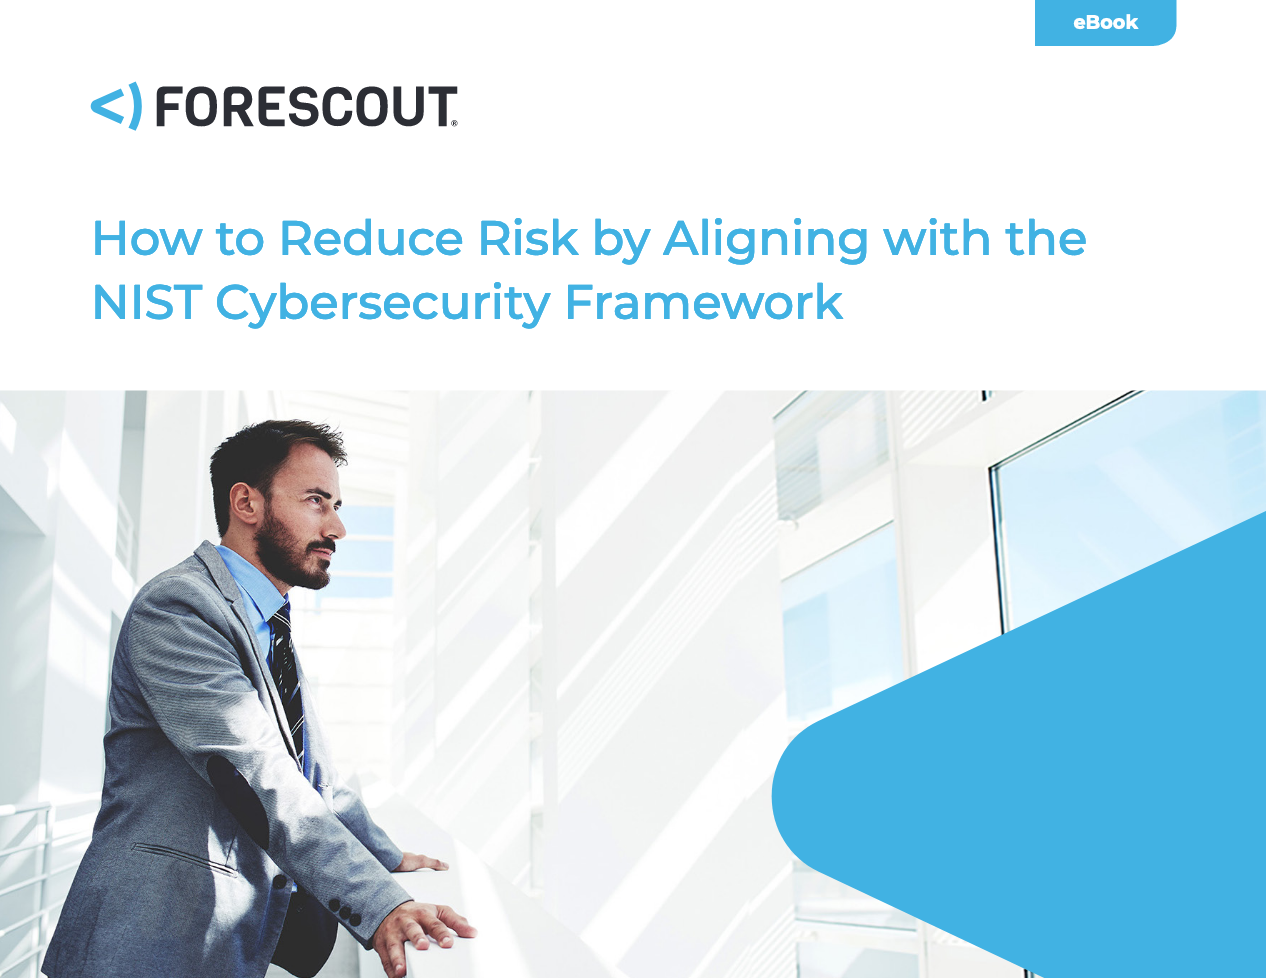 Reduce Risk by Aligning with the NIST Framework - How to Reduce Risk by Aligning with the NIST Cybersecurity Framework